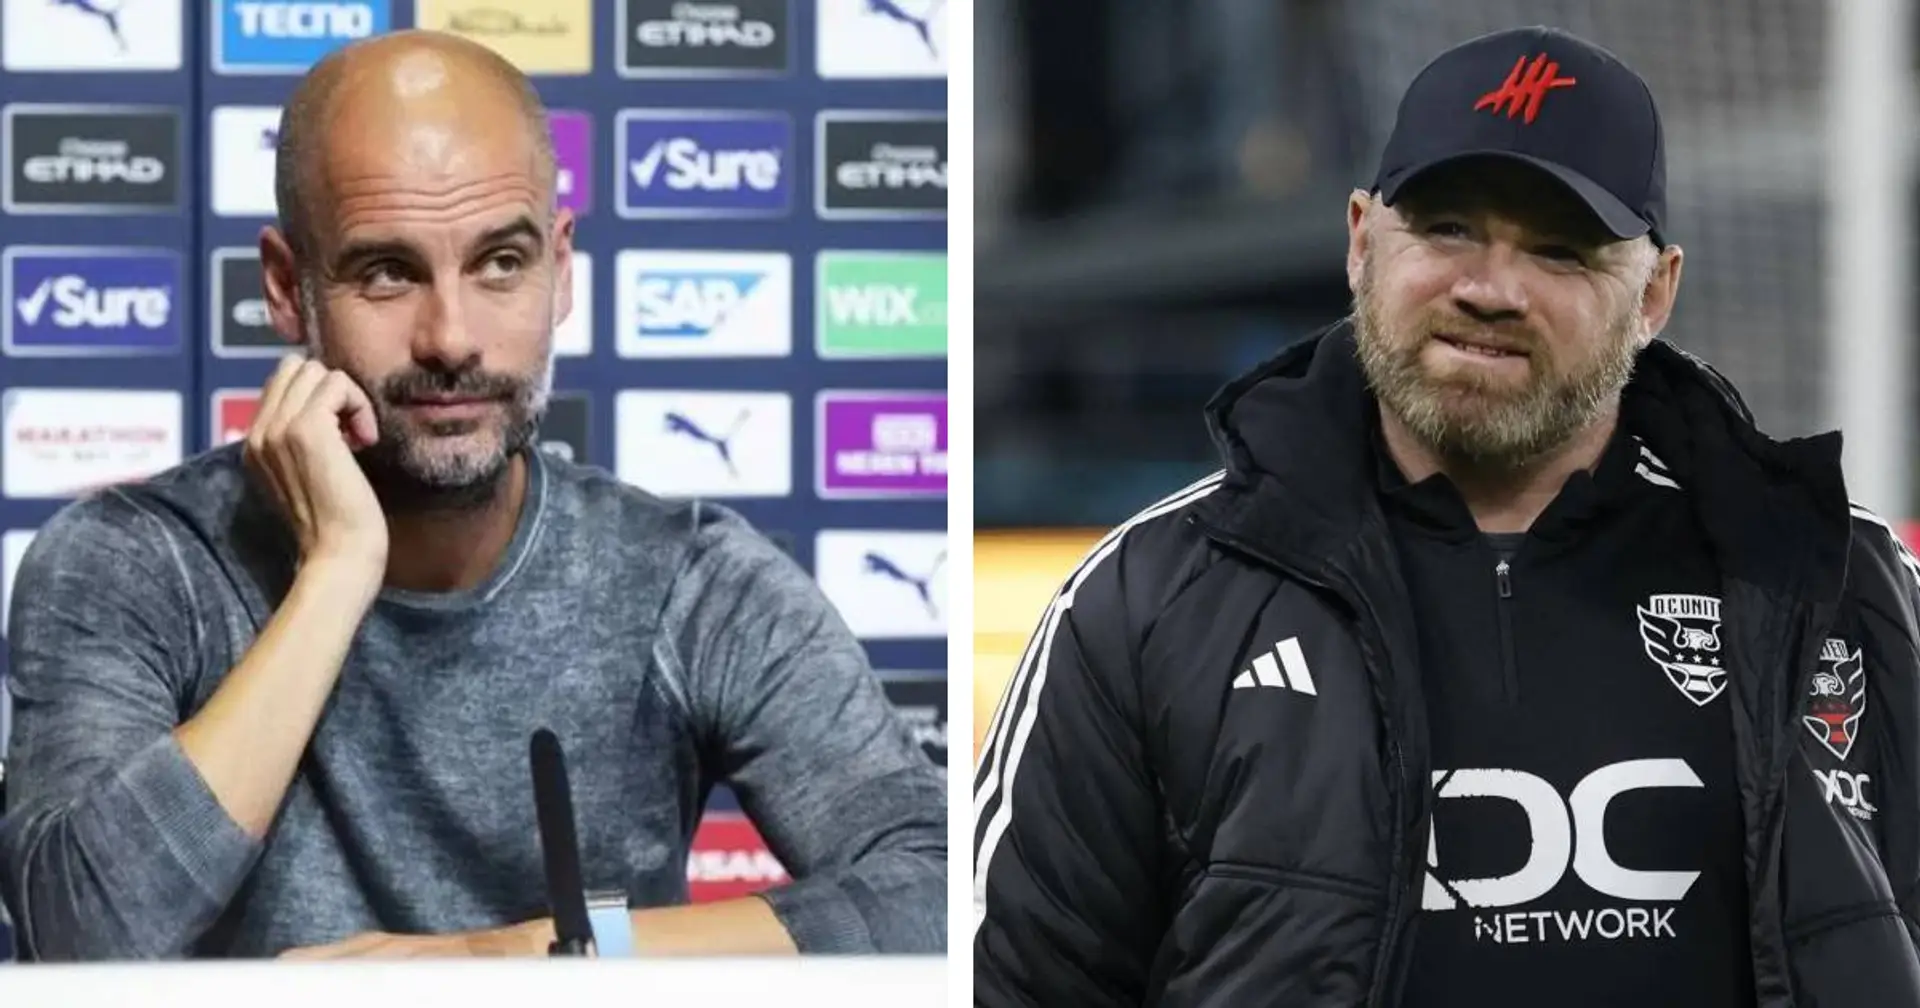 Pep Guardiola responds to Wayne Rooney's desire to work with him at Man City